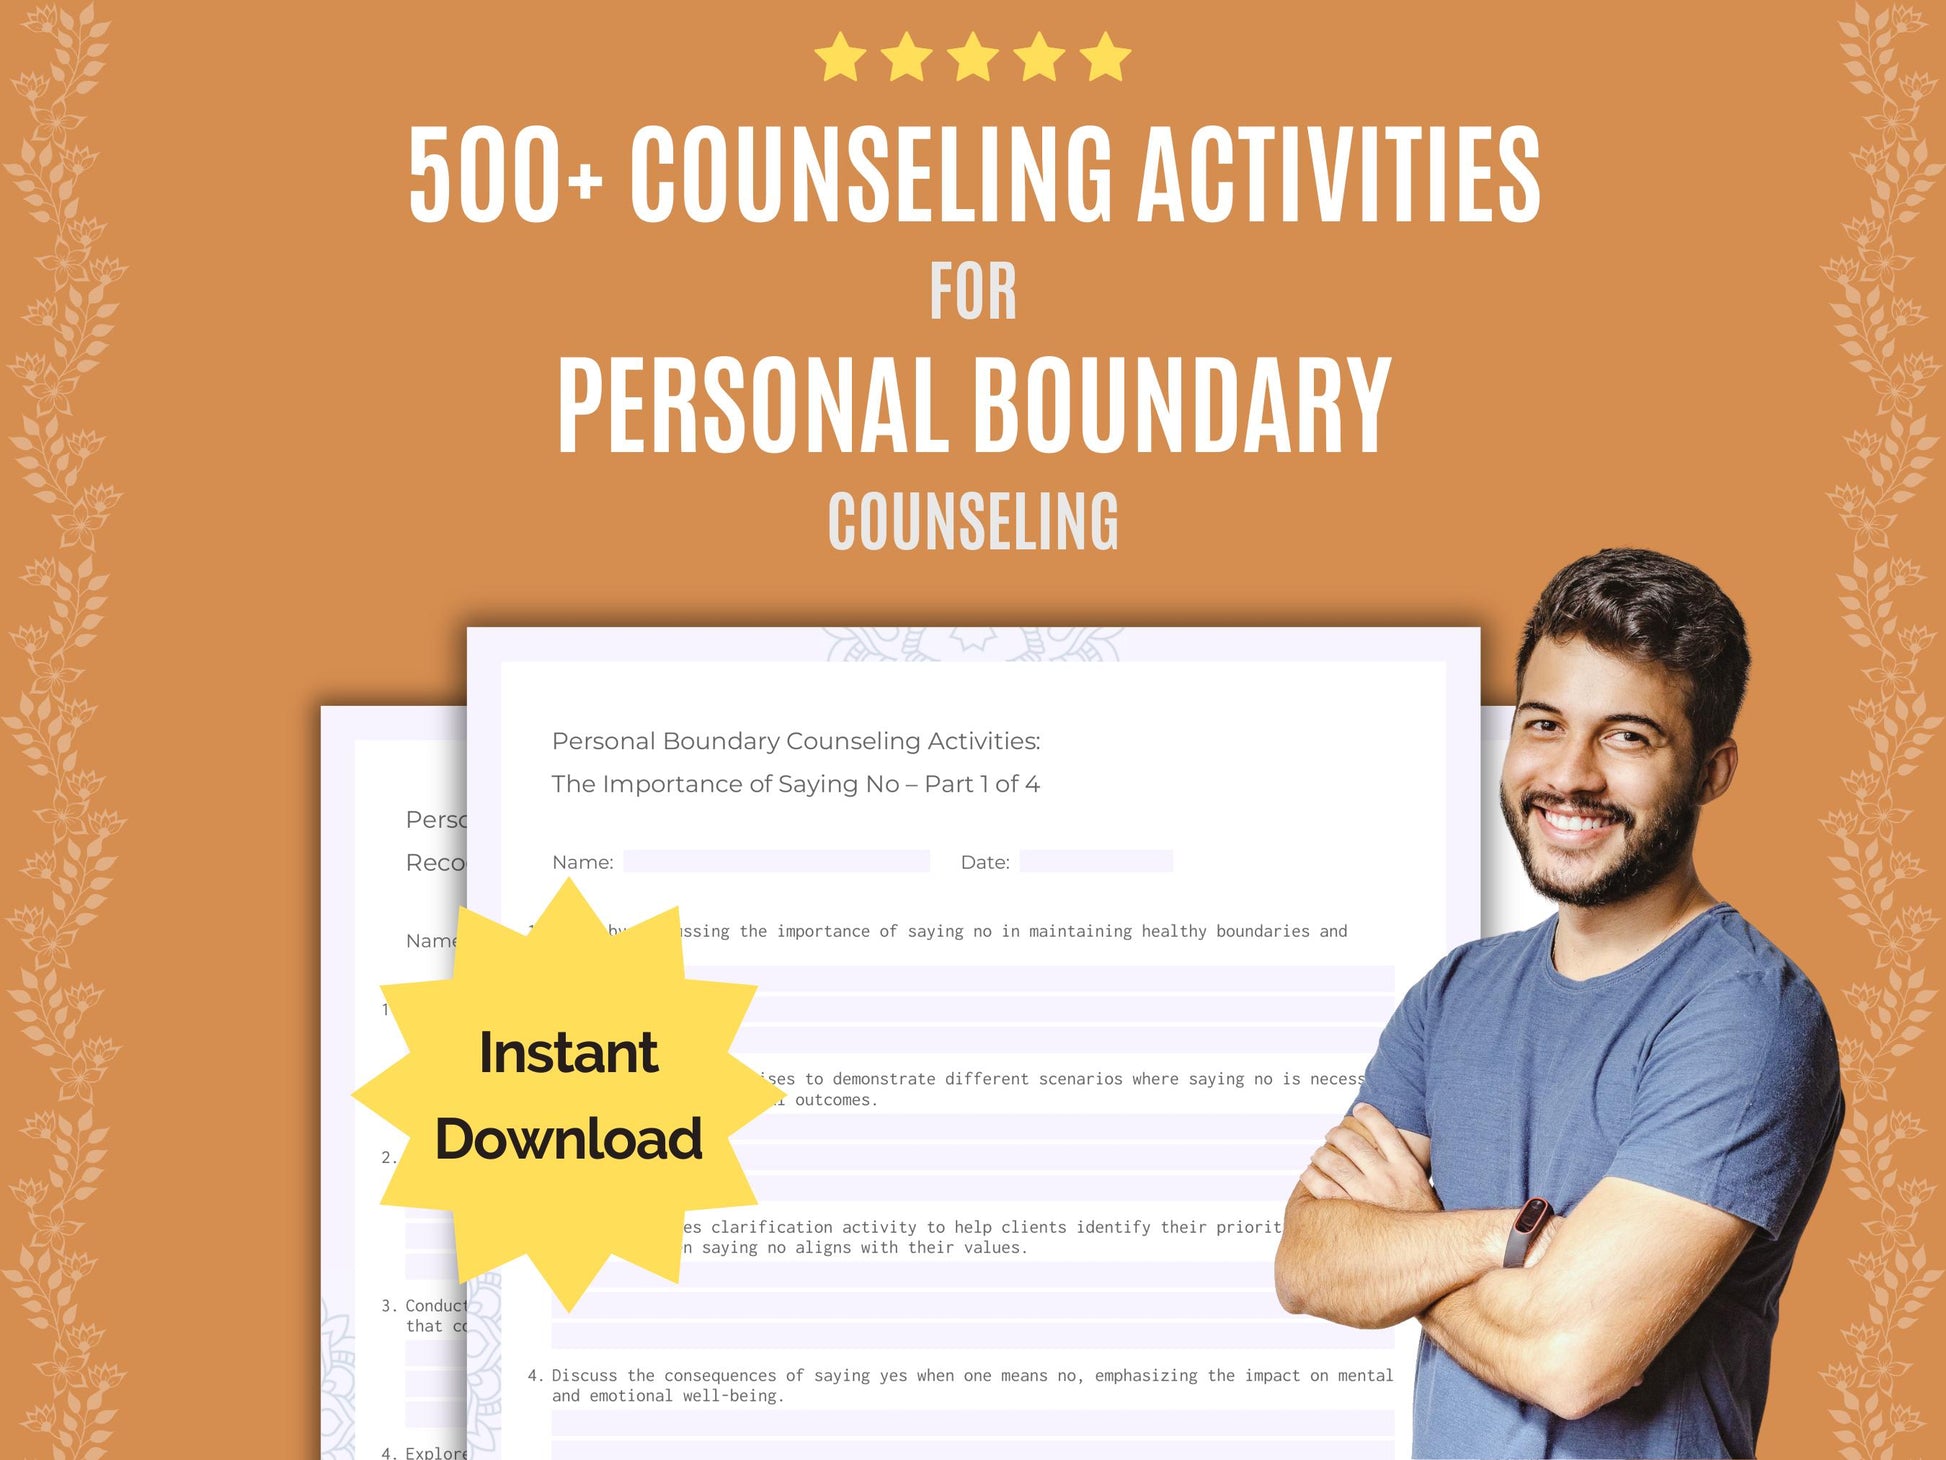 Personal Boundary Counseling